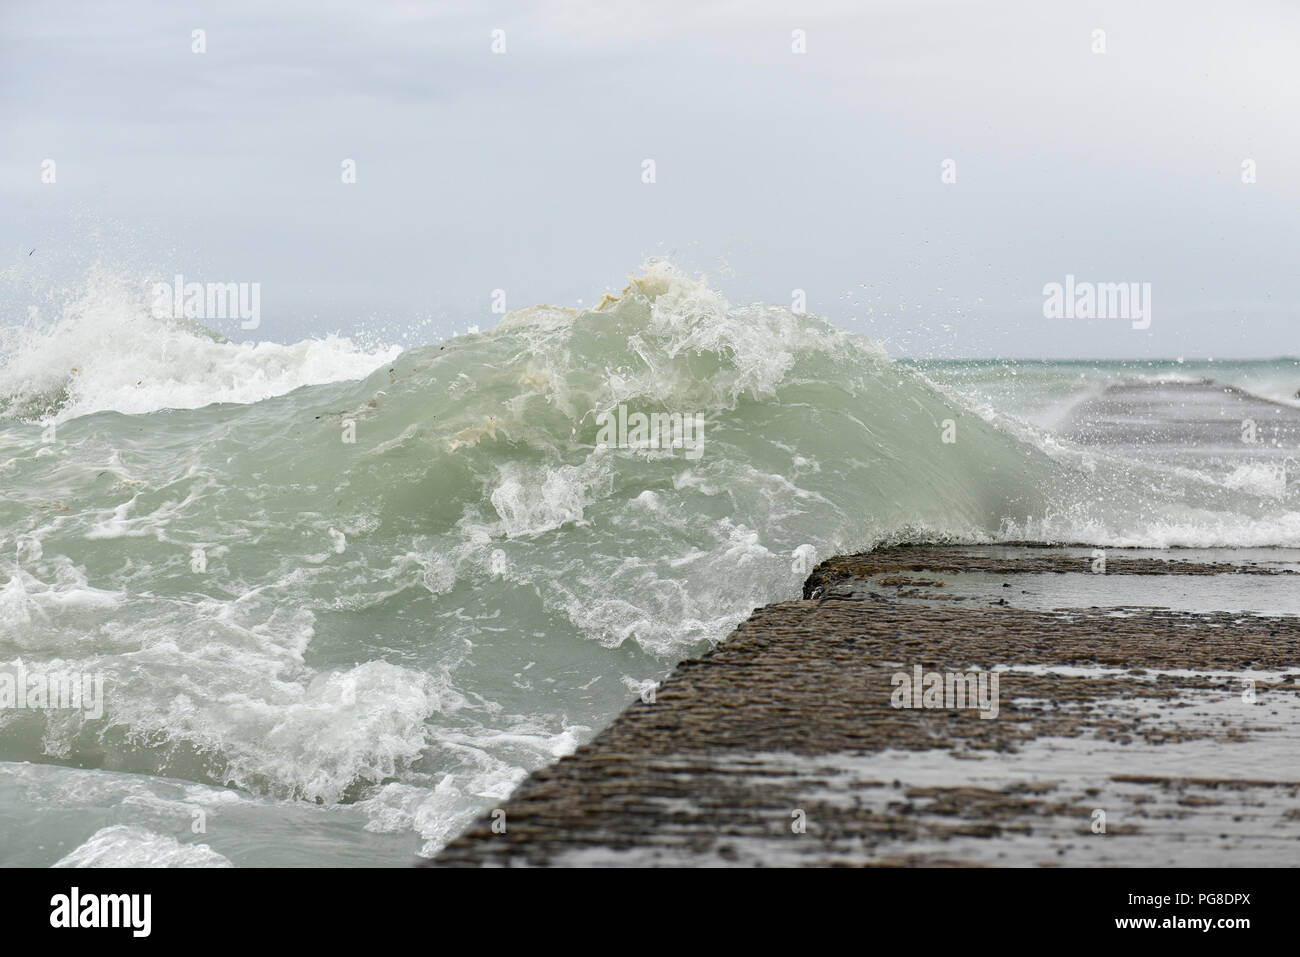 Honolulu. 23rd Aug, 2018. Photo taken on Aug. 23, 2018 shows strong tides lapping the seawall at Waikiki beach in Honolulu of Hawaii, the United States. Hurricane Lane, predicted as the biggest weather threat to Hawaii in decades, moved perilously close to the Aloha State Thursday morning, triggering heavy rain, landslide and flooding. Credit: Sun Ruibo/Xinhua/Alamy Live News Stock Photo